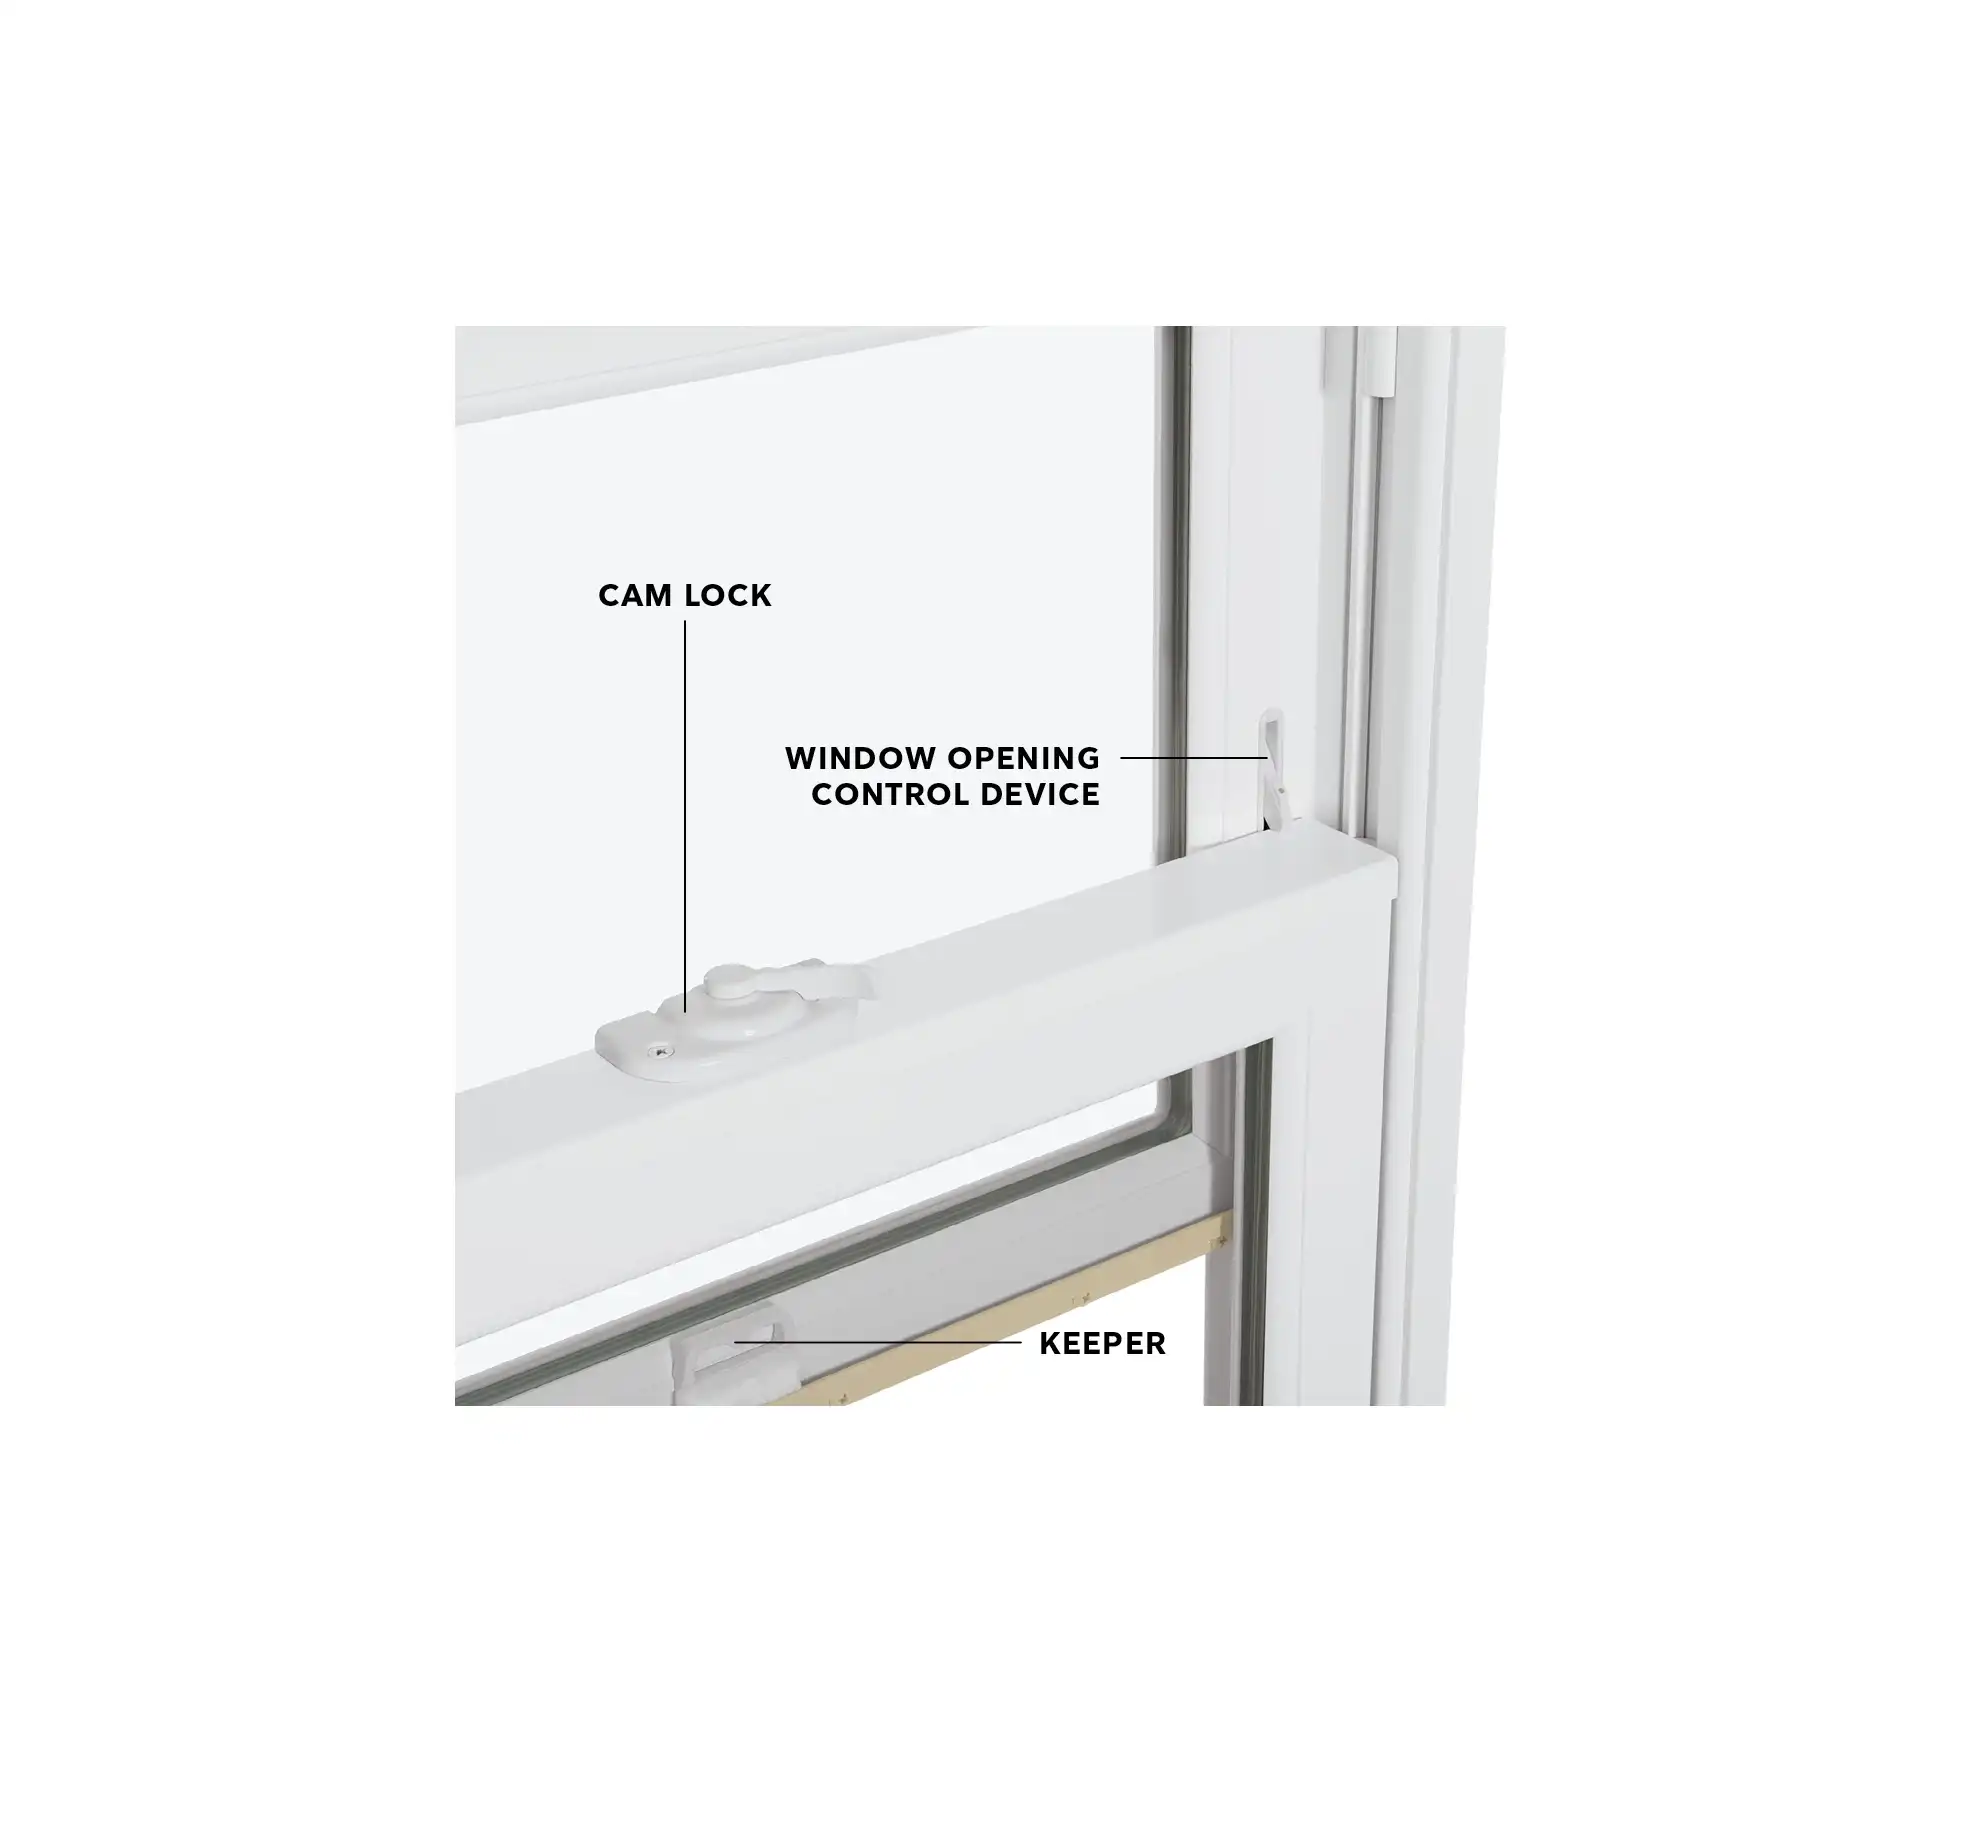 Double hung window parts